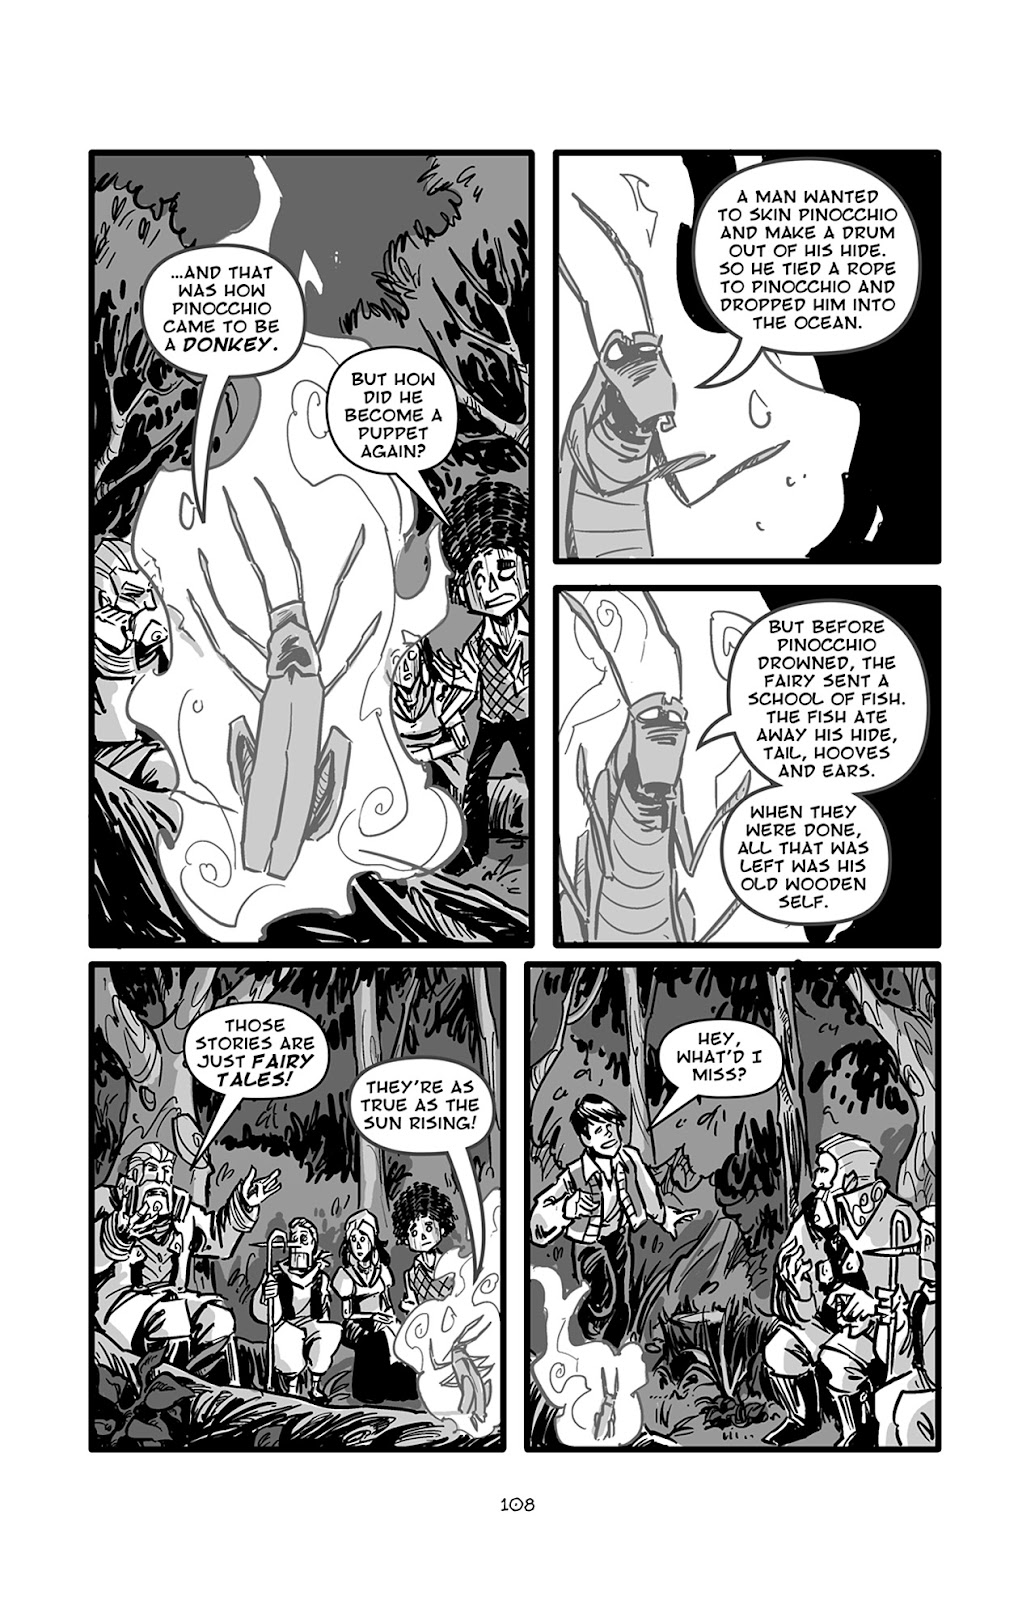 Pinocchio: Vampire Slayer - Of Wood and Blood issue 5 - Page 9